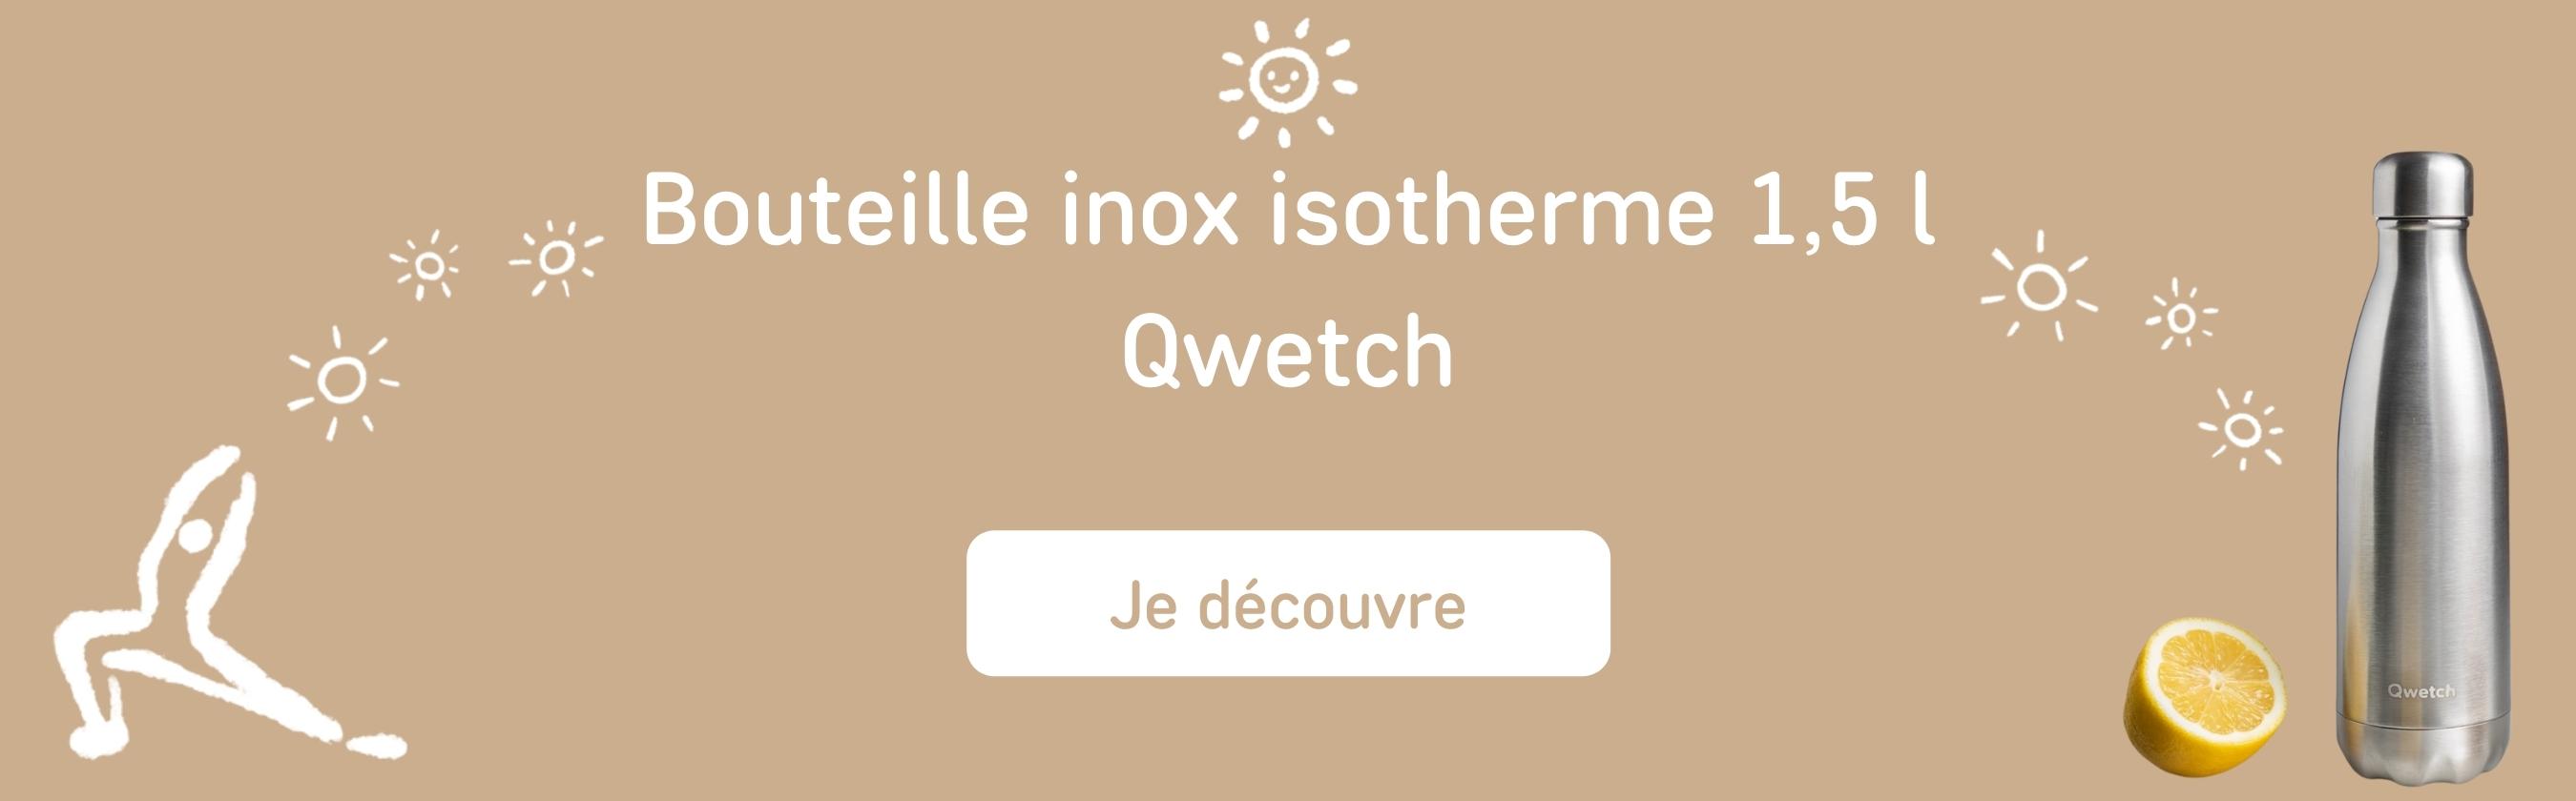 Bouteille inox isotherme 1,5 l Qwetch